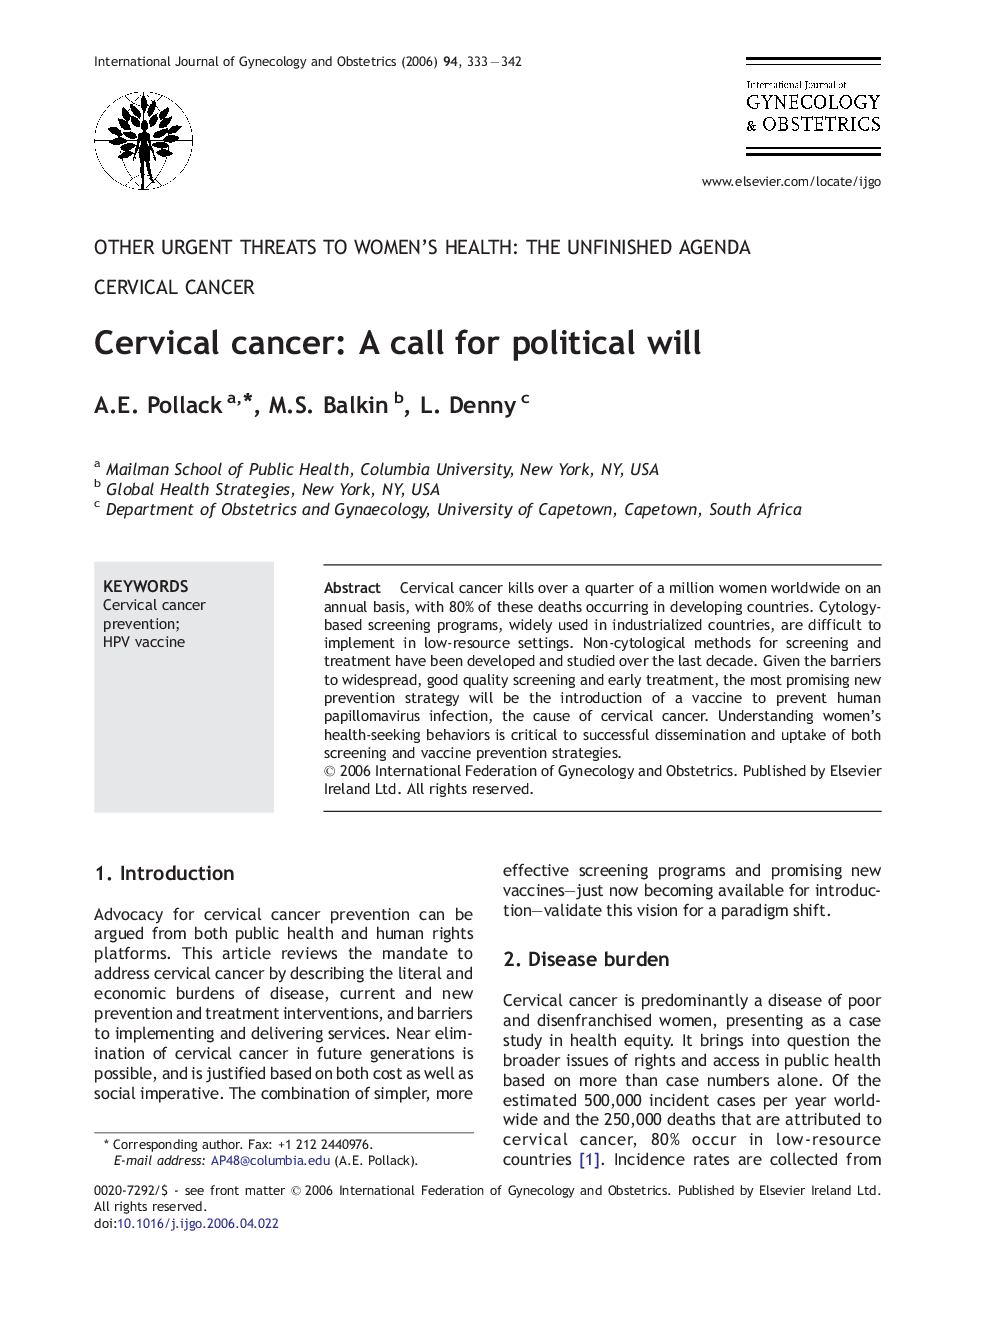 Cervical cancer: A call for political will